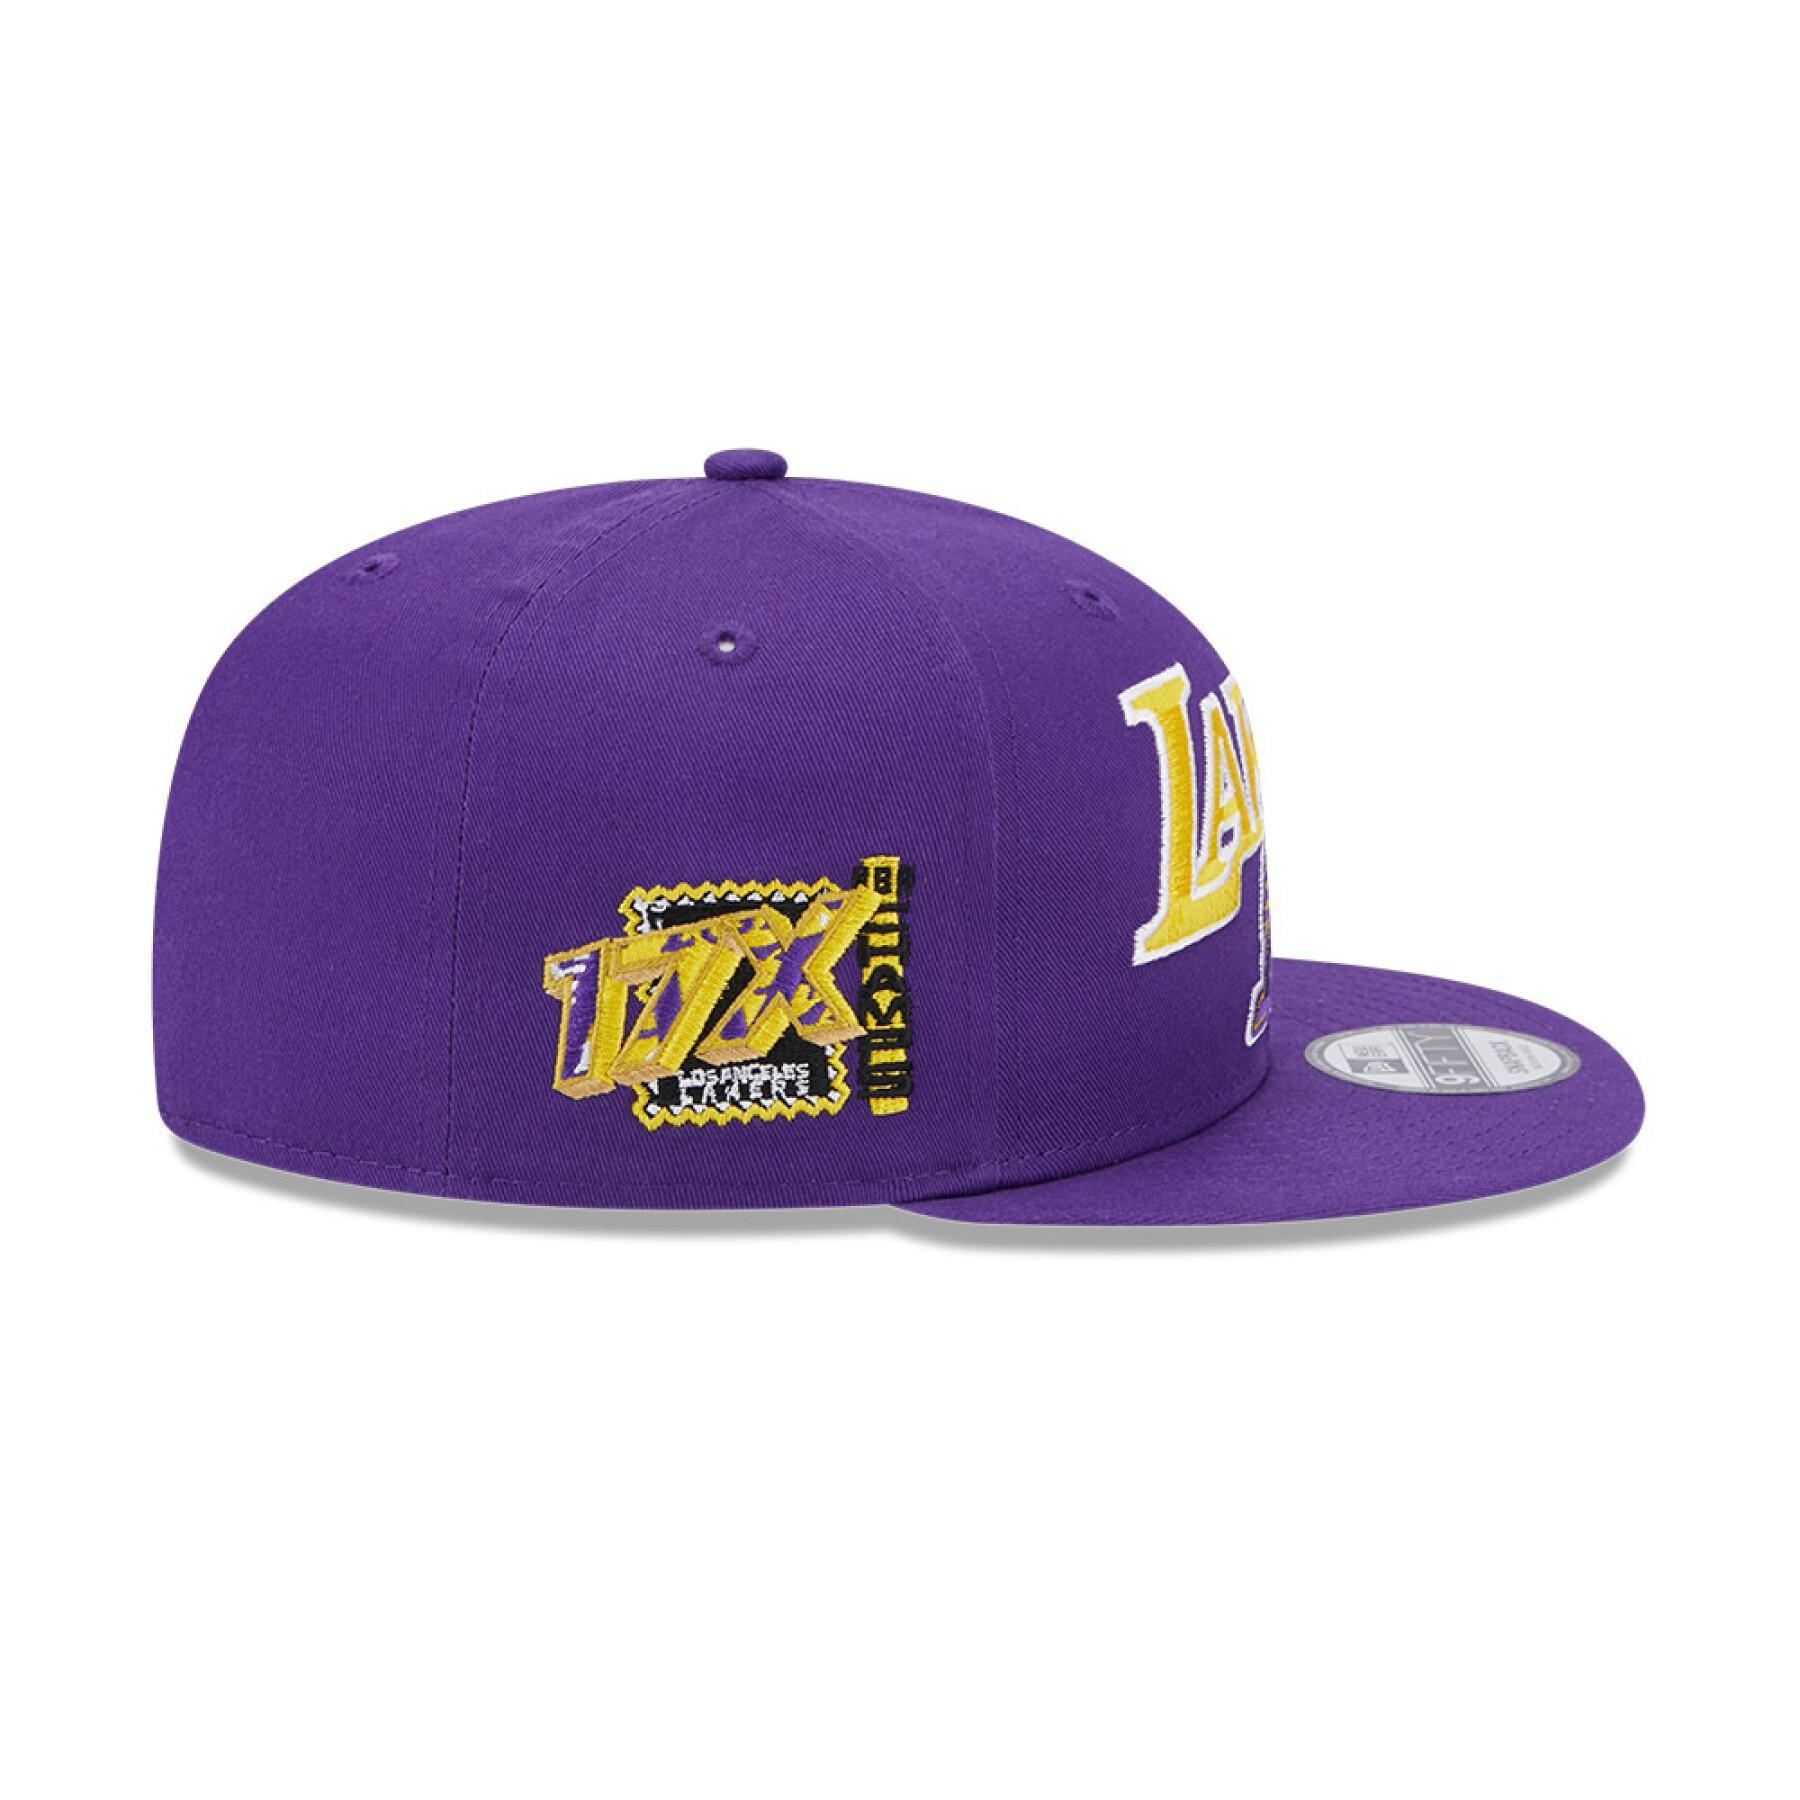 Gorra 9fifty Los Angeles Lakers NBA Patch